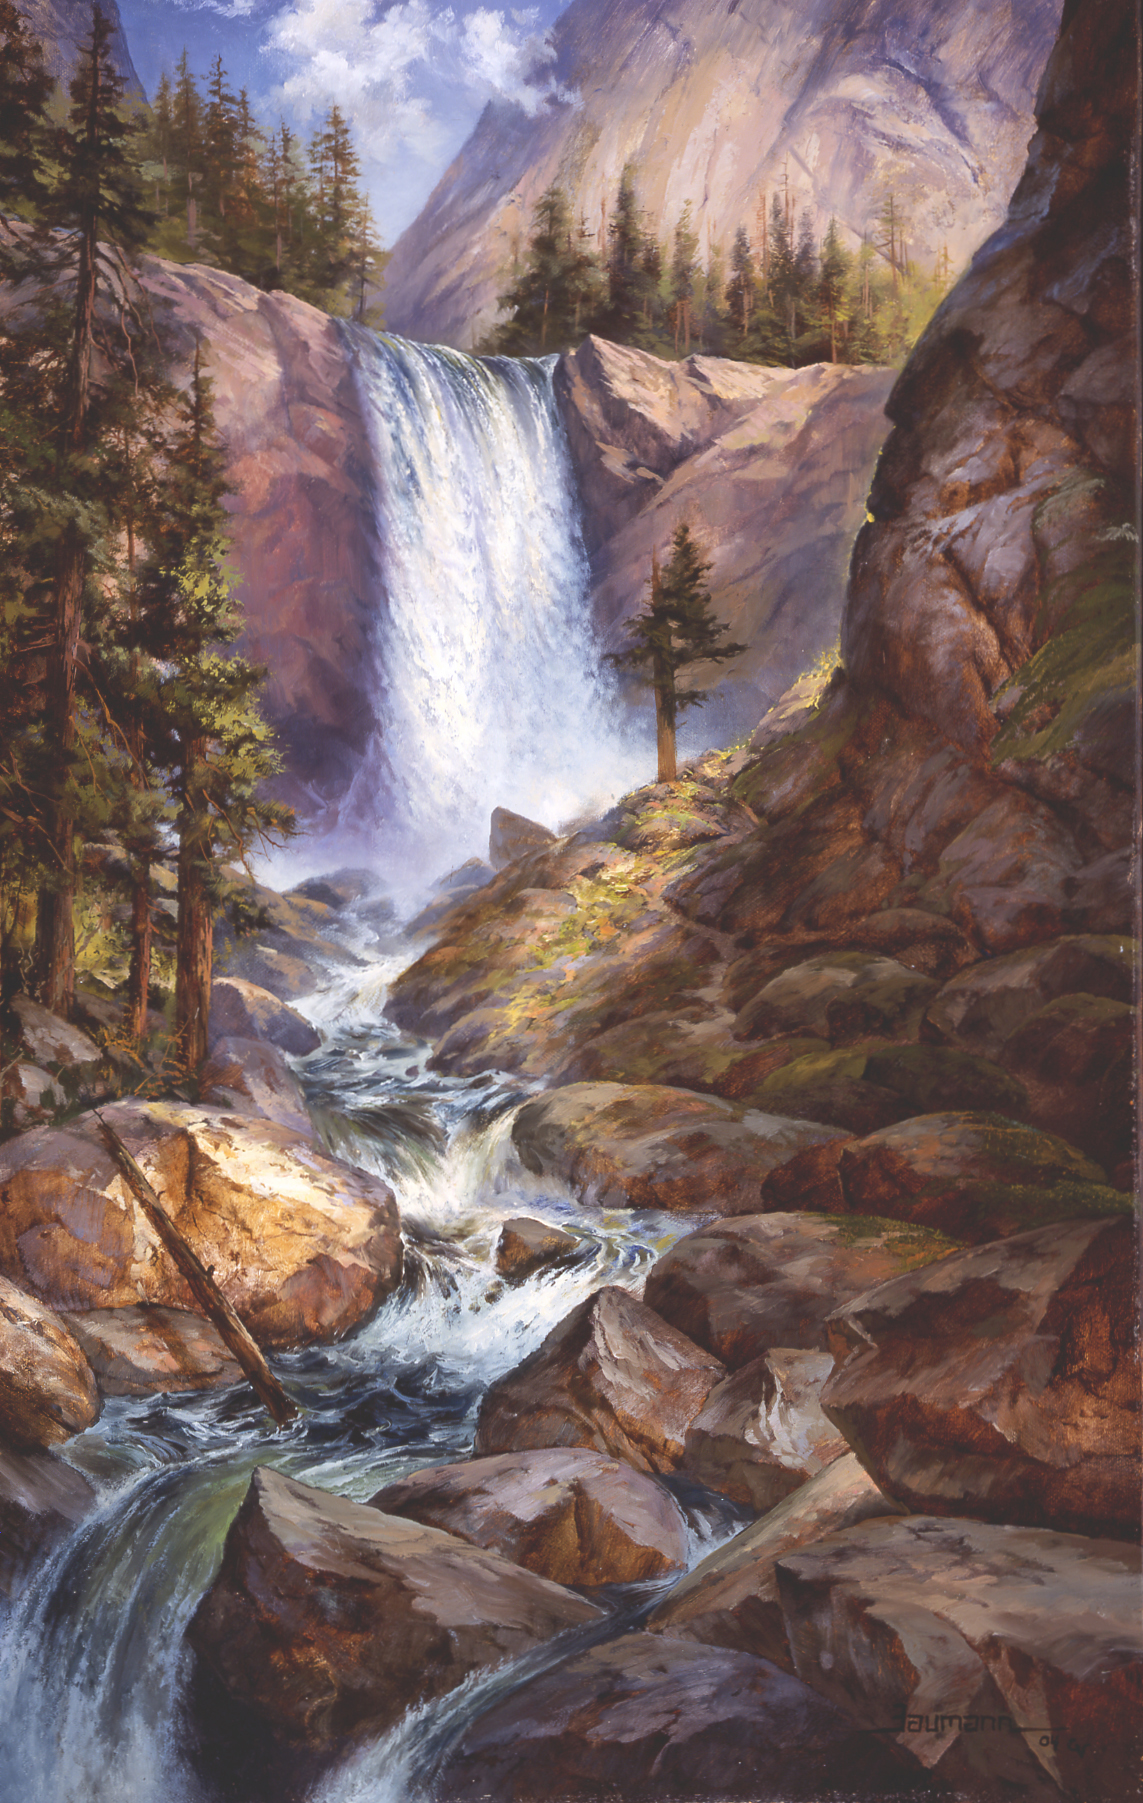 This oil painting of Vernal Fall in Yosemite Park by Stefan Baumann features a glorious view of the falls with the river flowing toward the viewer.